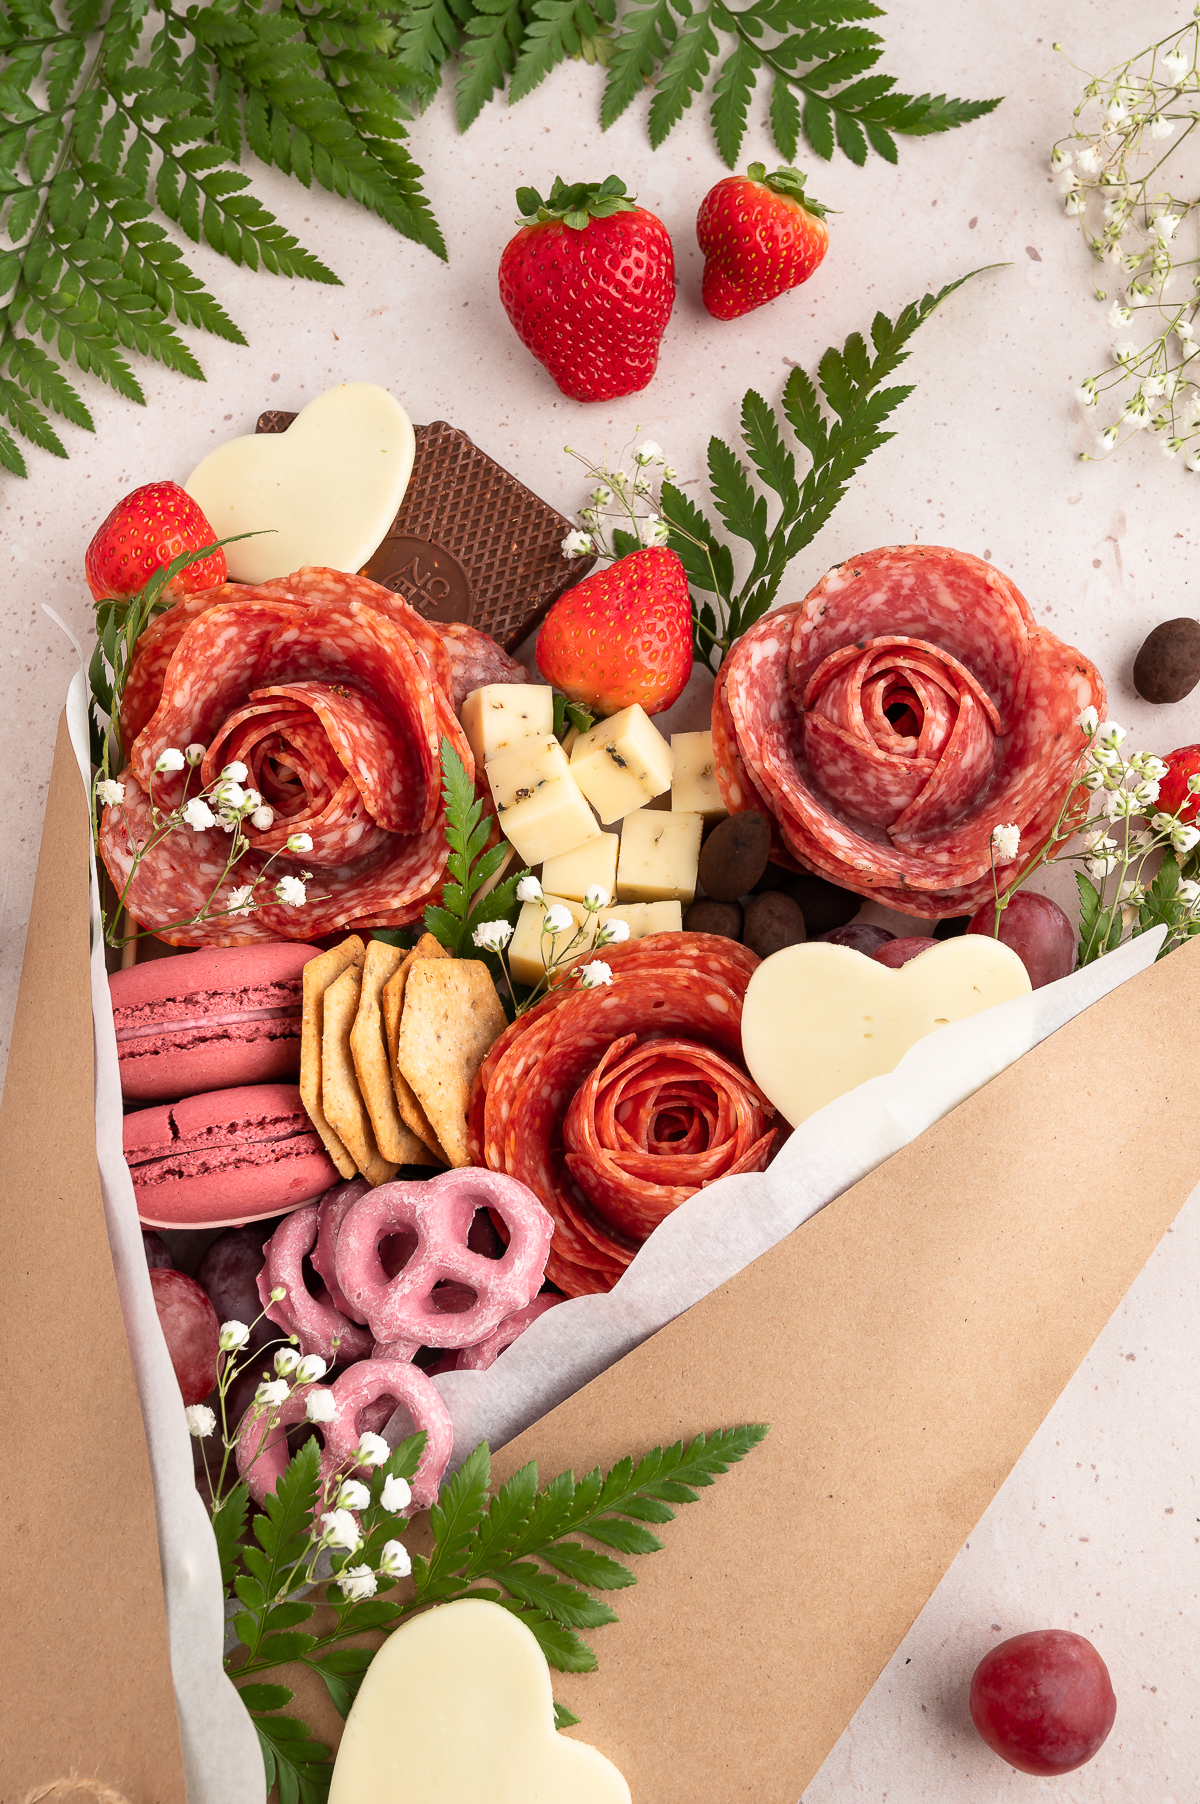 up close view of a completed charcuterie bouquet with traditional charcuterie and desserts